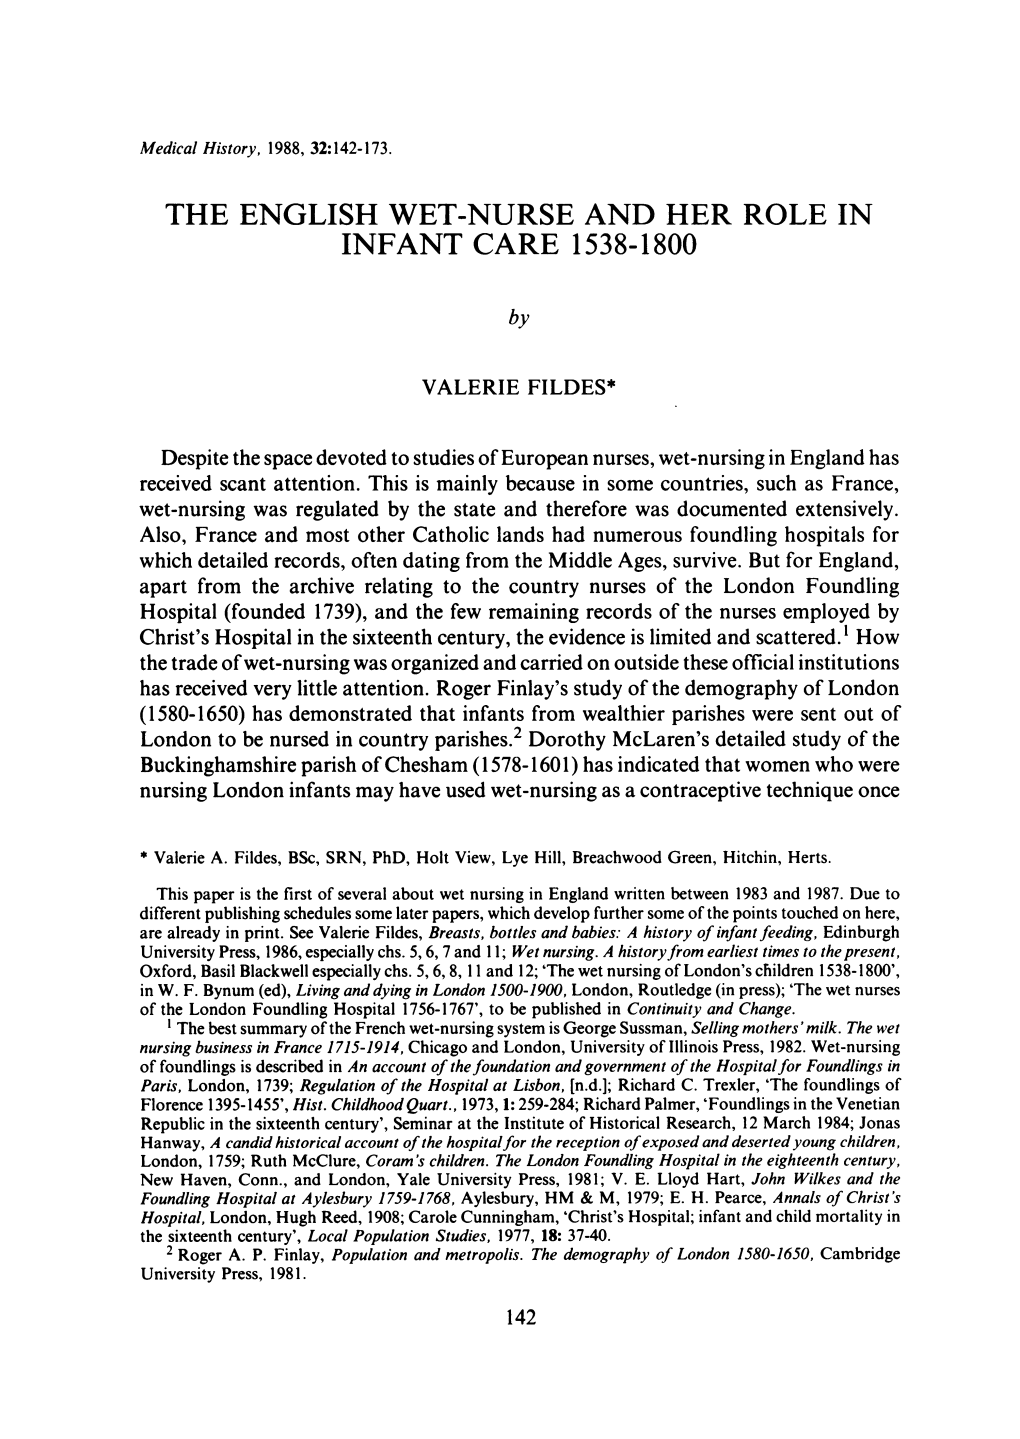 The English Wet-Nurse and Her Role in Infant Care 1538-1800